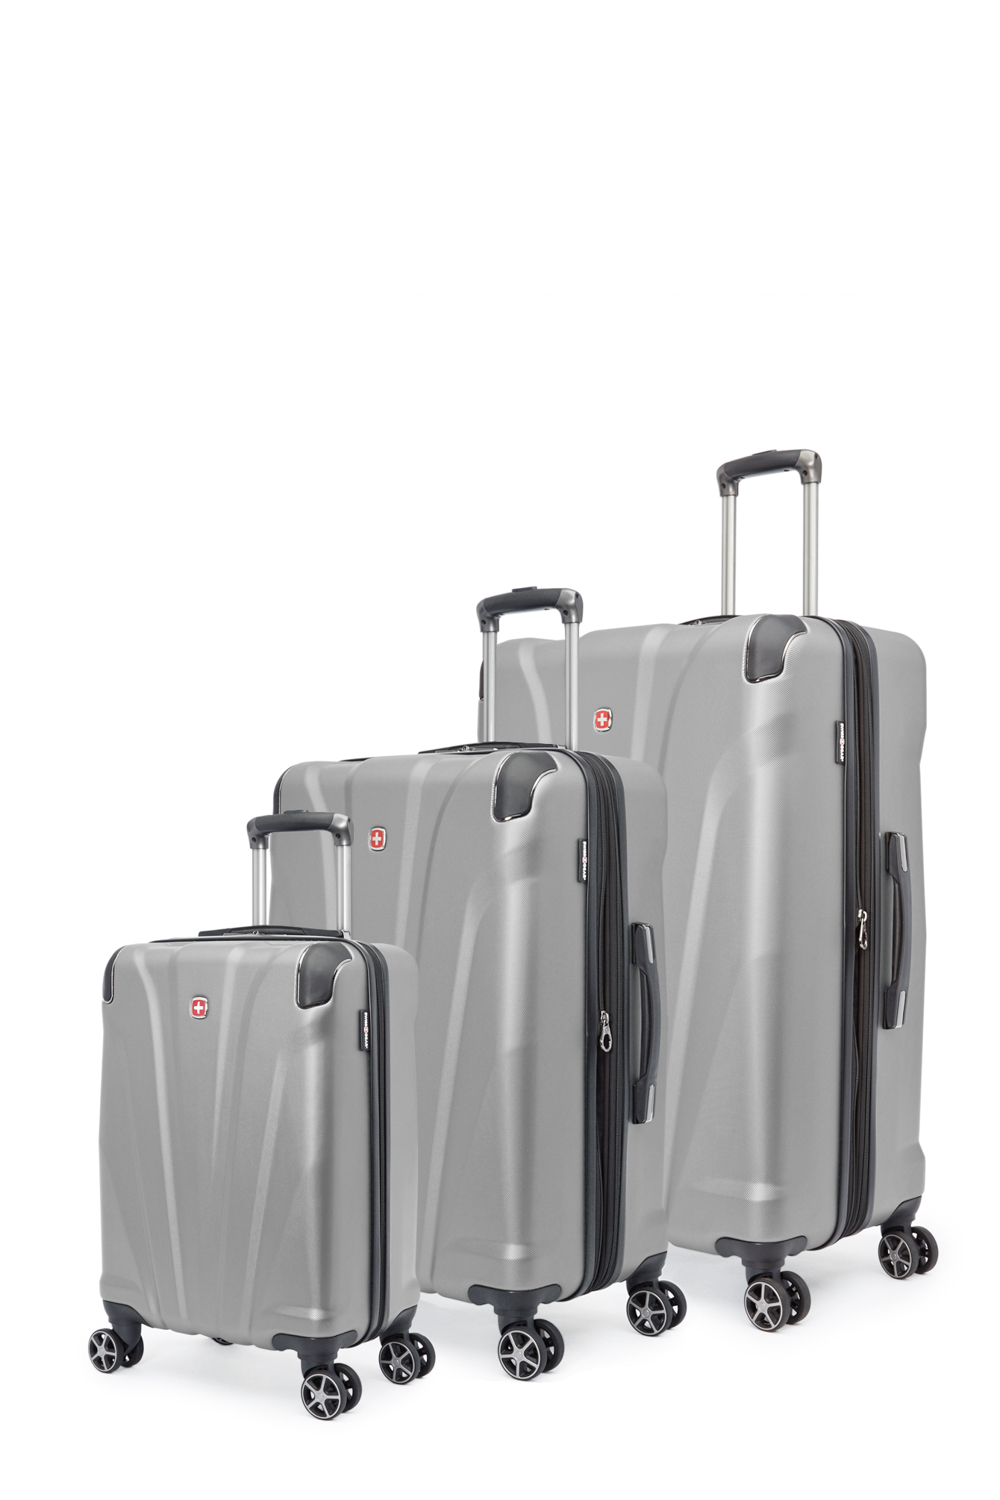 Amazon.com | SWISS MOBILITY AHB Collection 3 Piece Hard Shell Luggage Set,  Expandable Suitcases with 360-Degree Spinner Wheels, Retractable Handle, 20  Inch Carry On, 24 Inch Mid-size, 28 Inch Large Bags, Blue | Suitcases